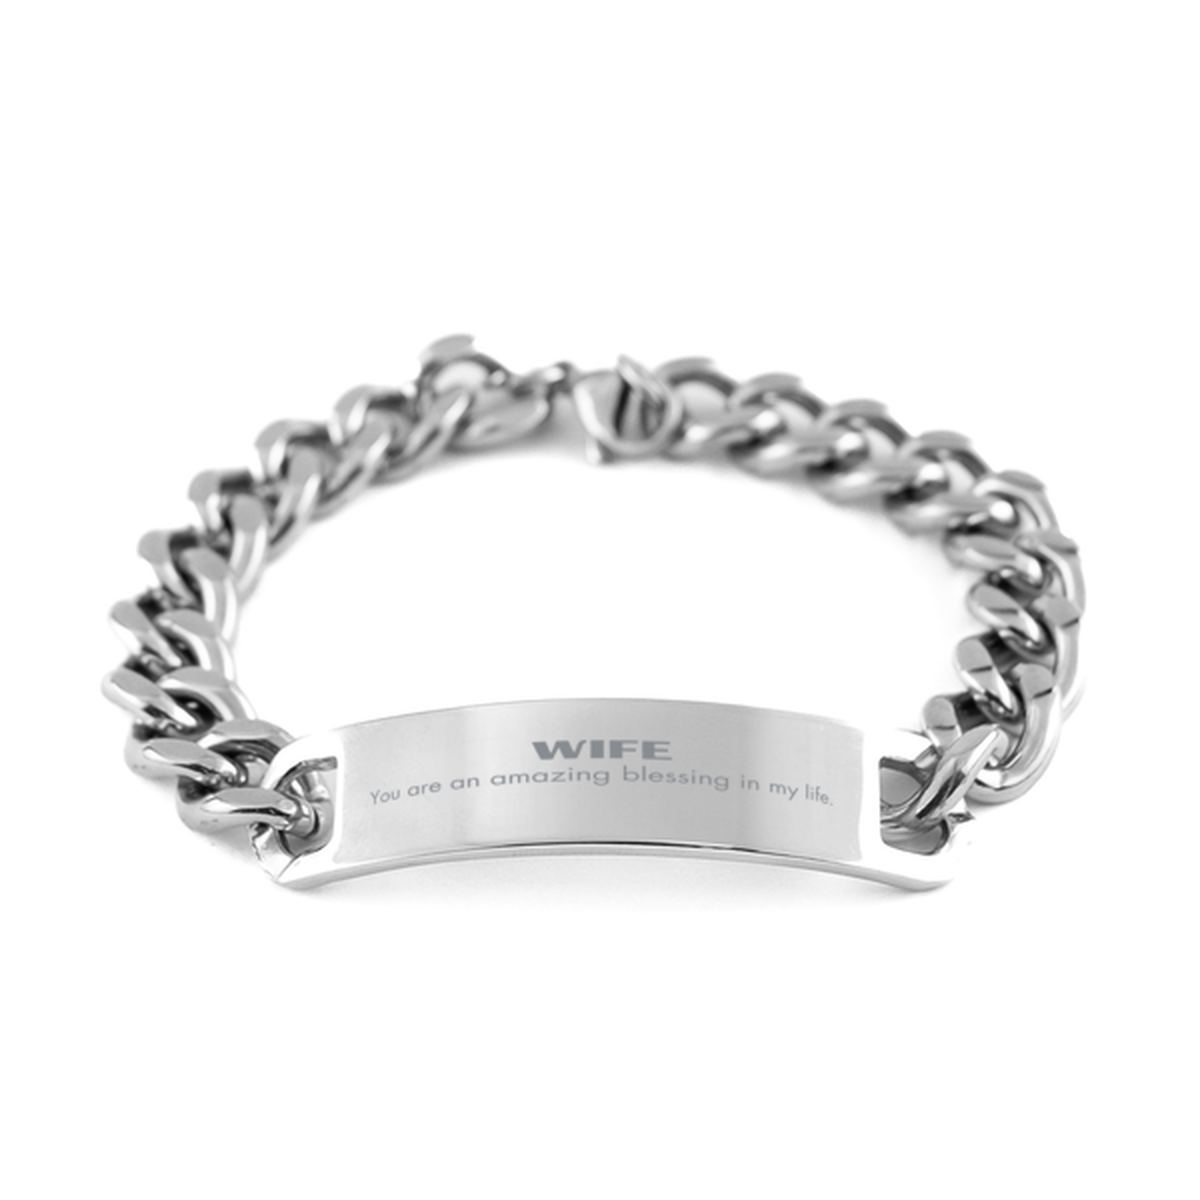 Wife Cuban Chain Stainless Steel Bracelet, You are an amazing blessing in my life, Thank You Gifts For Wife, Inspirational Birthday Christmas Unique Gifts For Wife